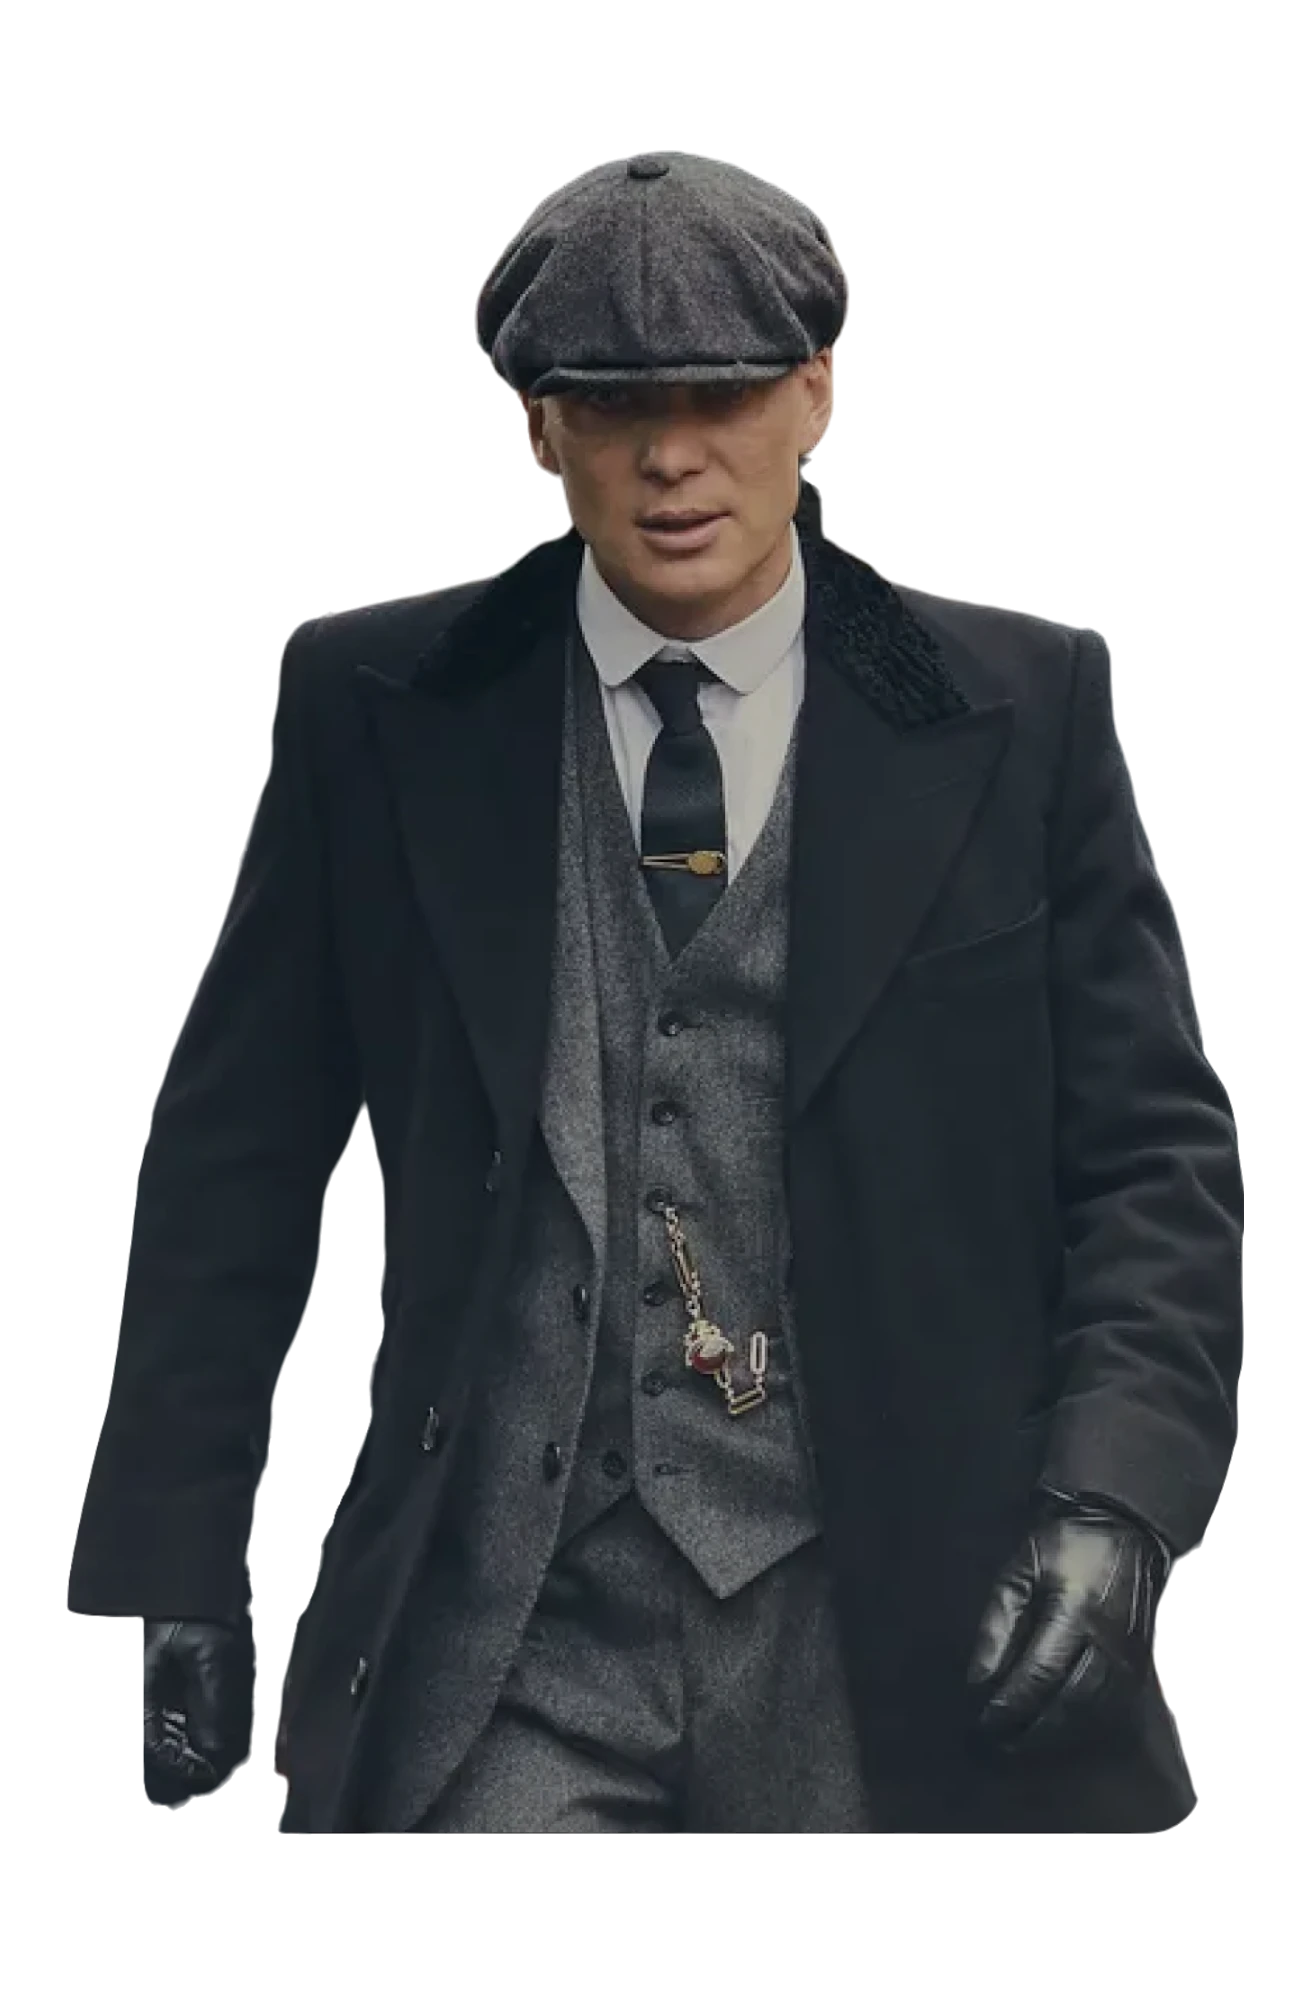 A person in a suit and hat